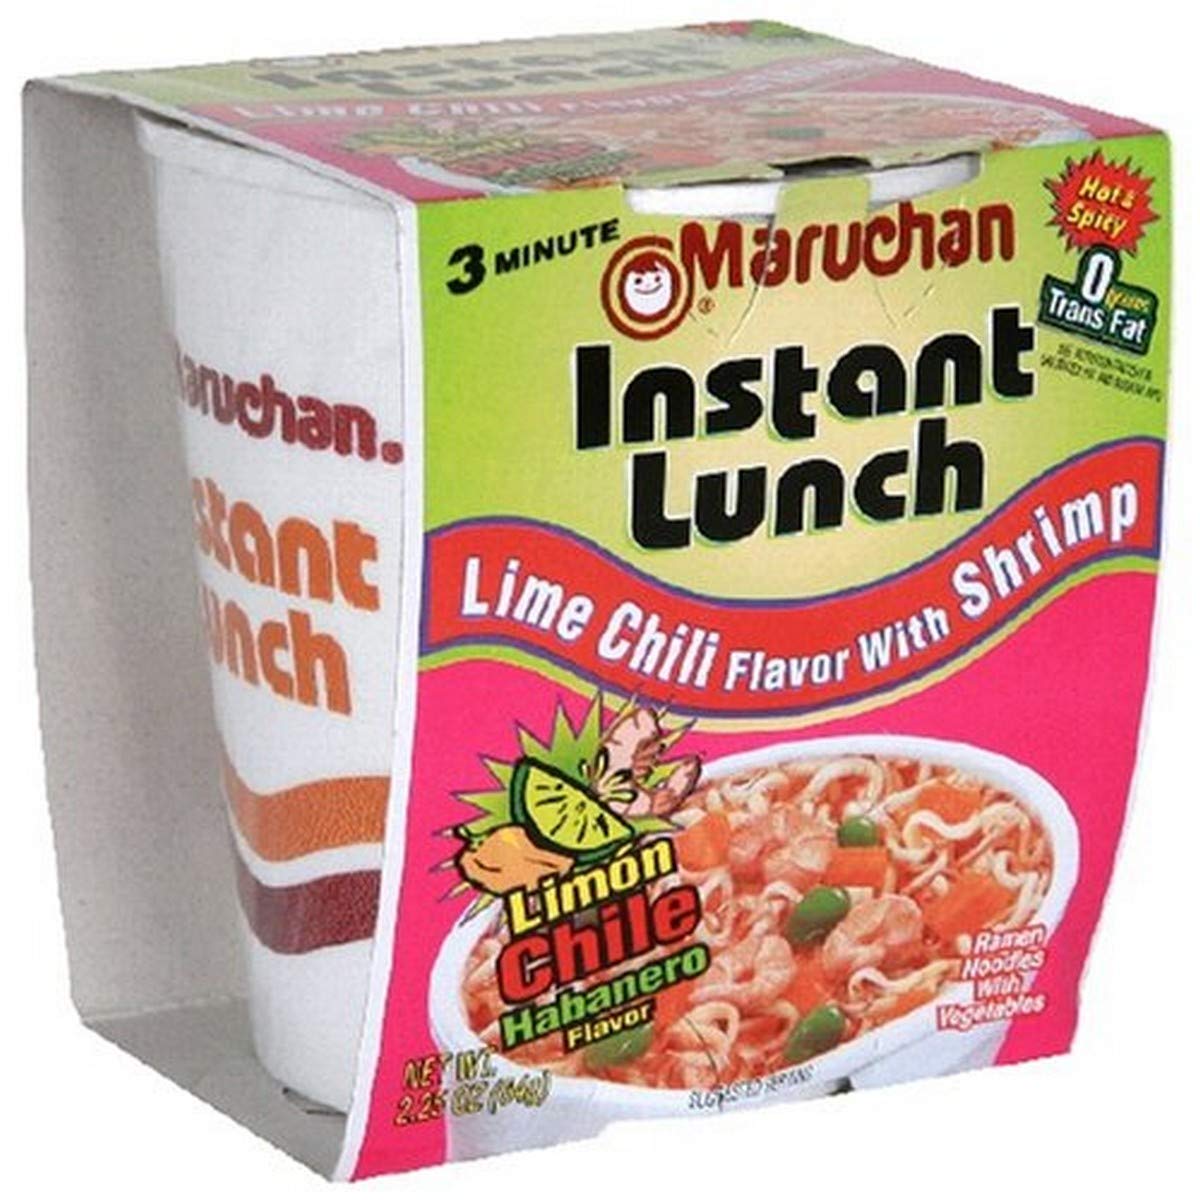 Maruchan Instant Lunch, Lime Chili with Shrimp, 2.25 oz